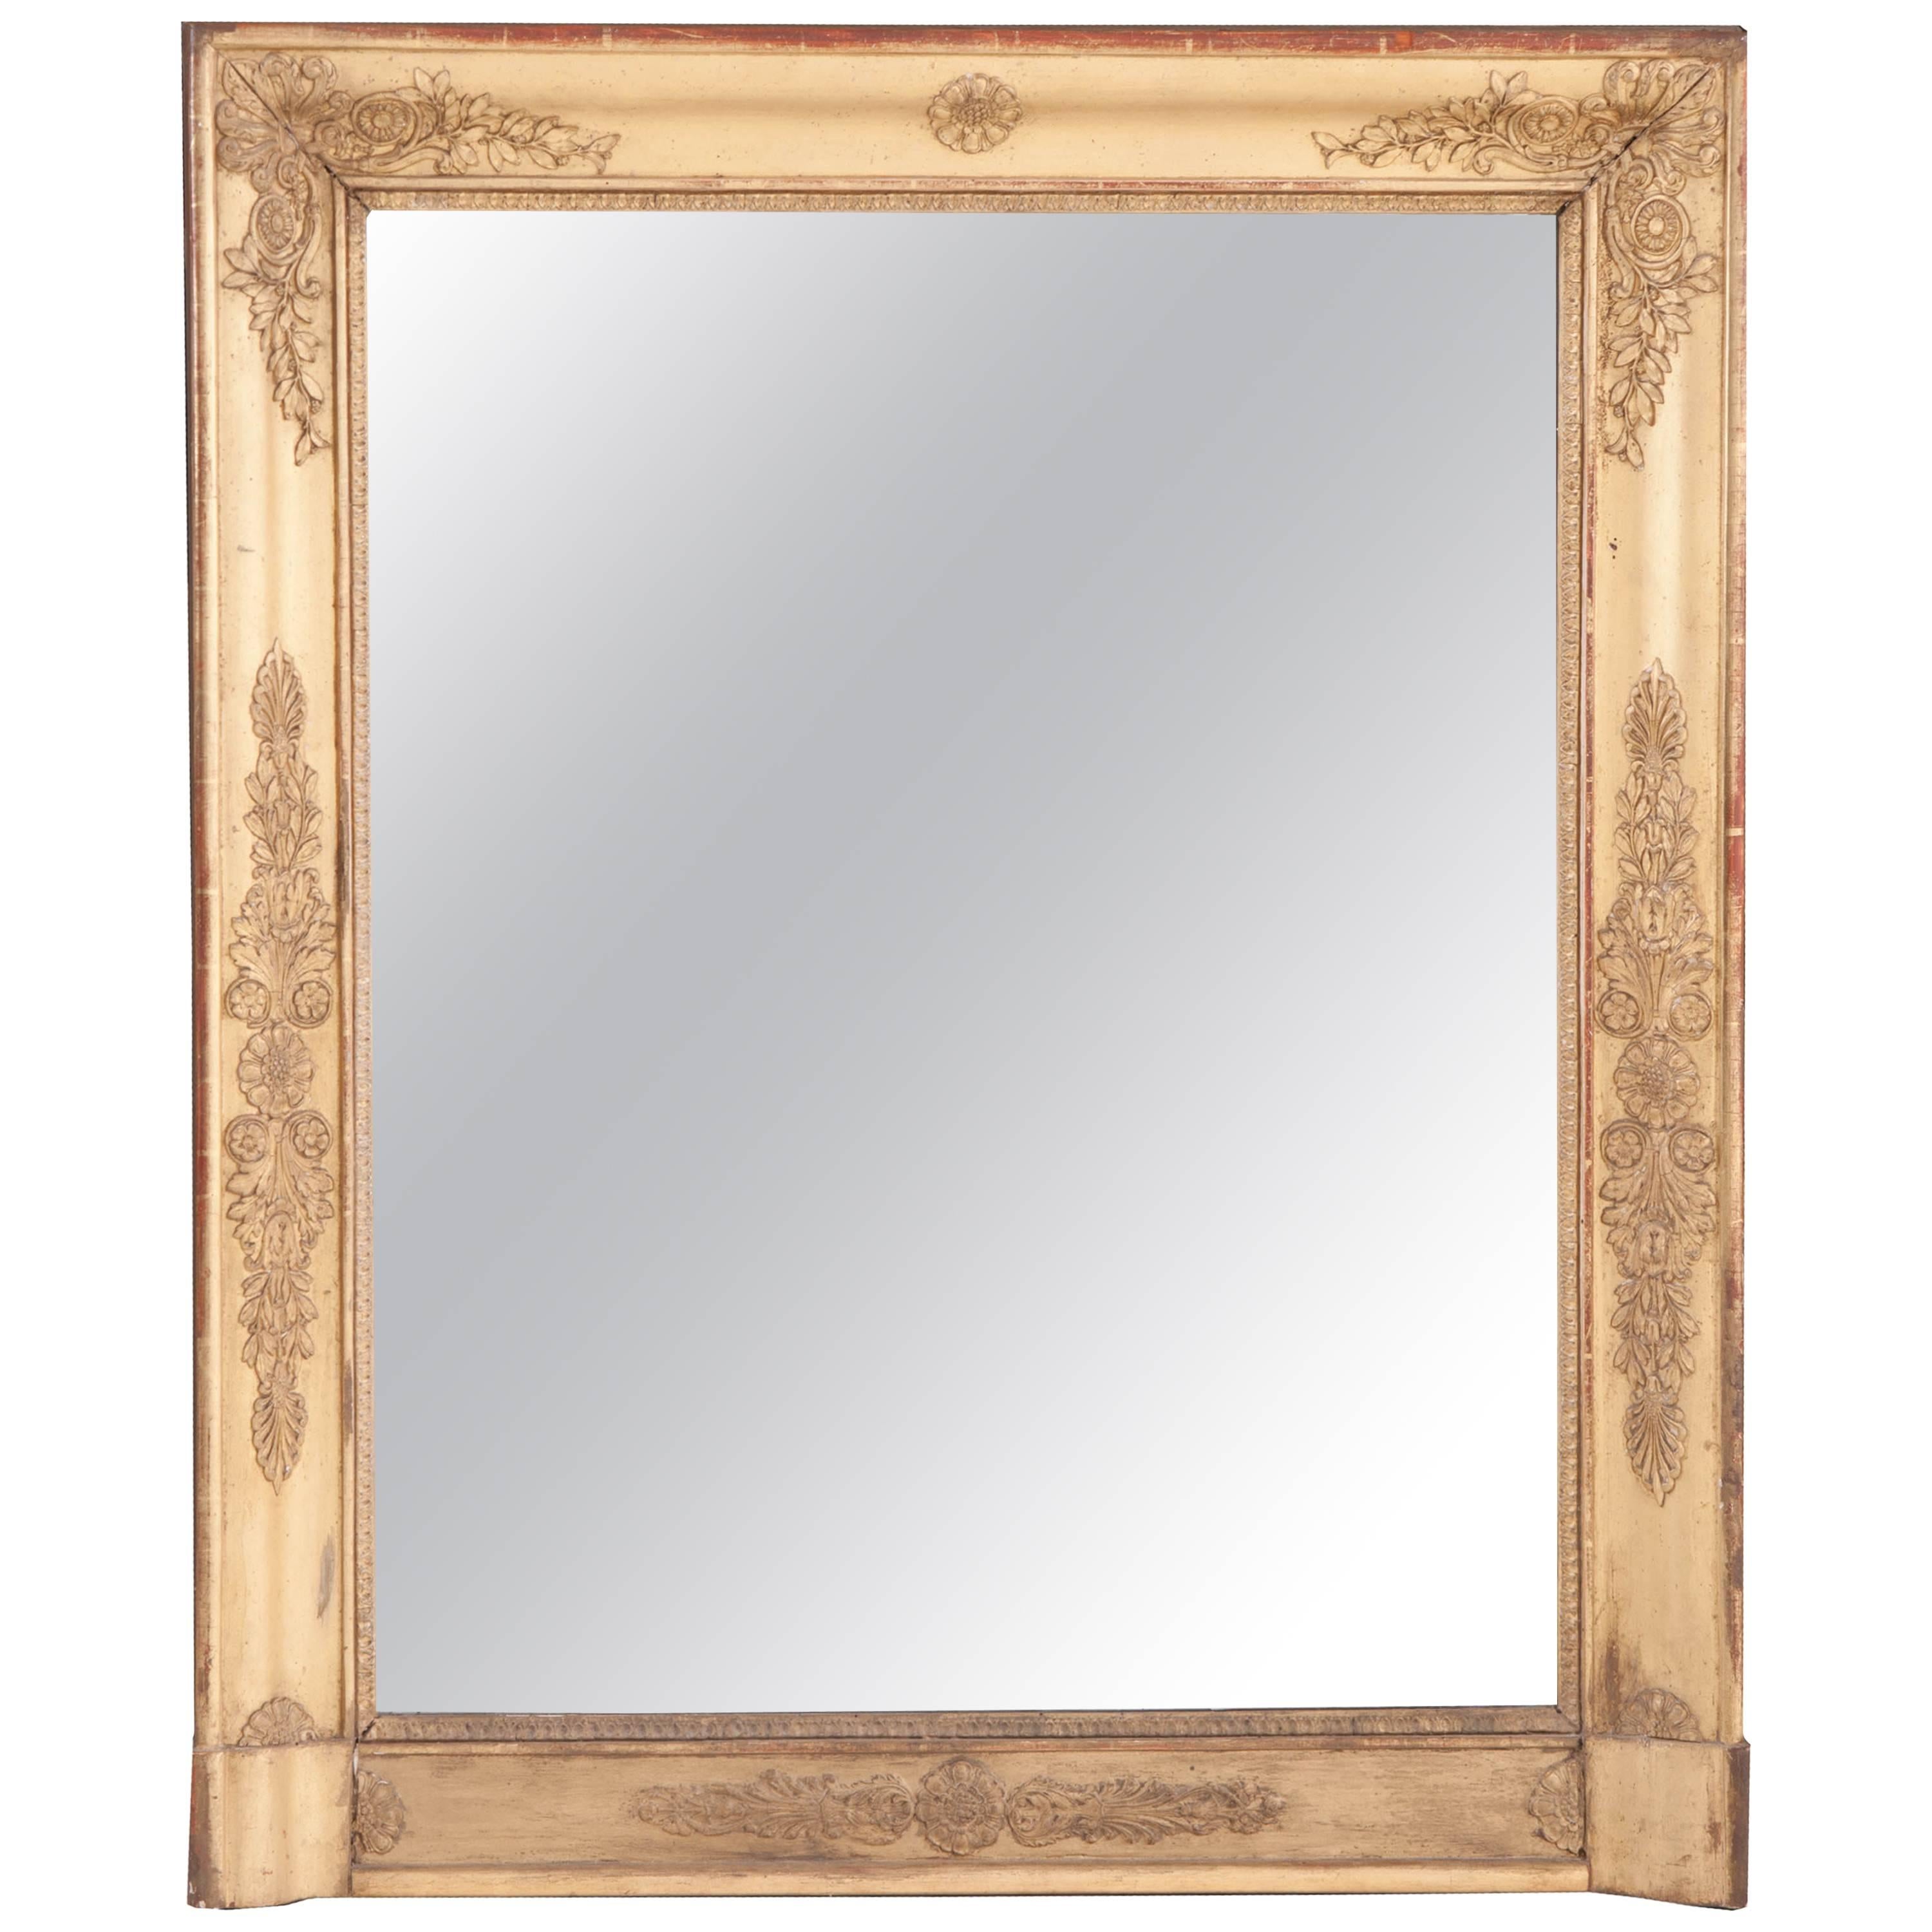 French 19th Century Empire Giltwood Mirror